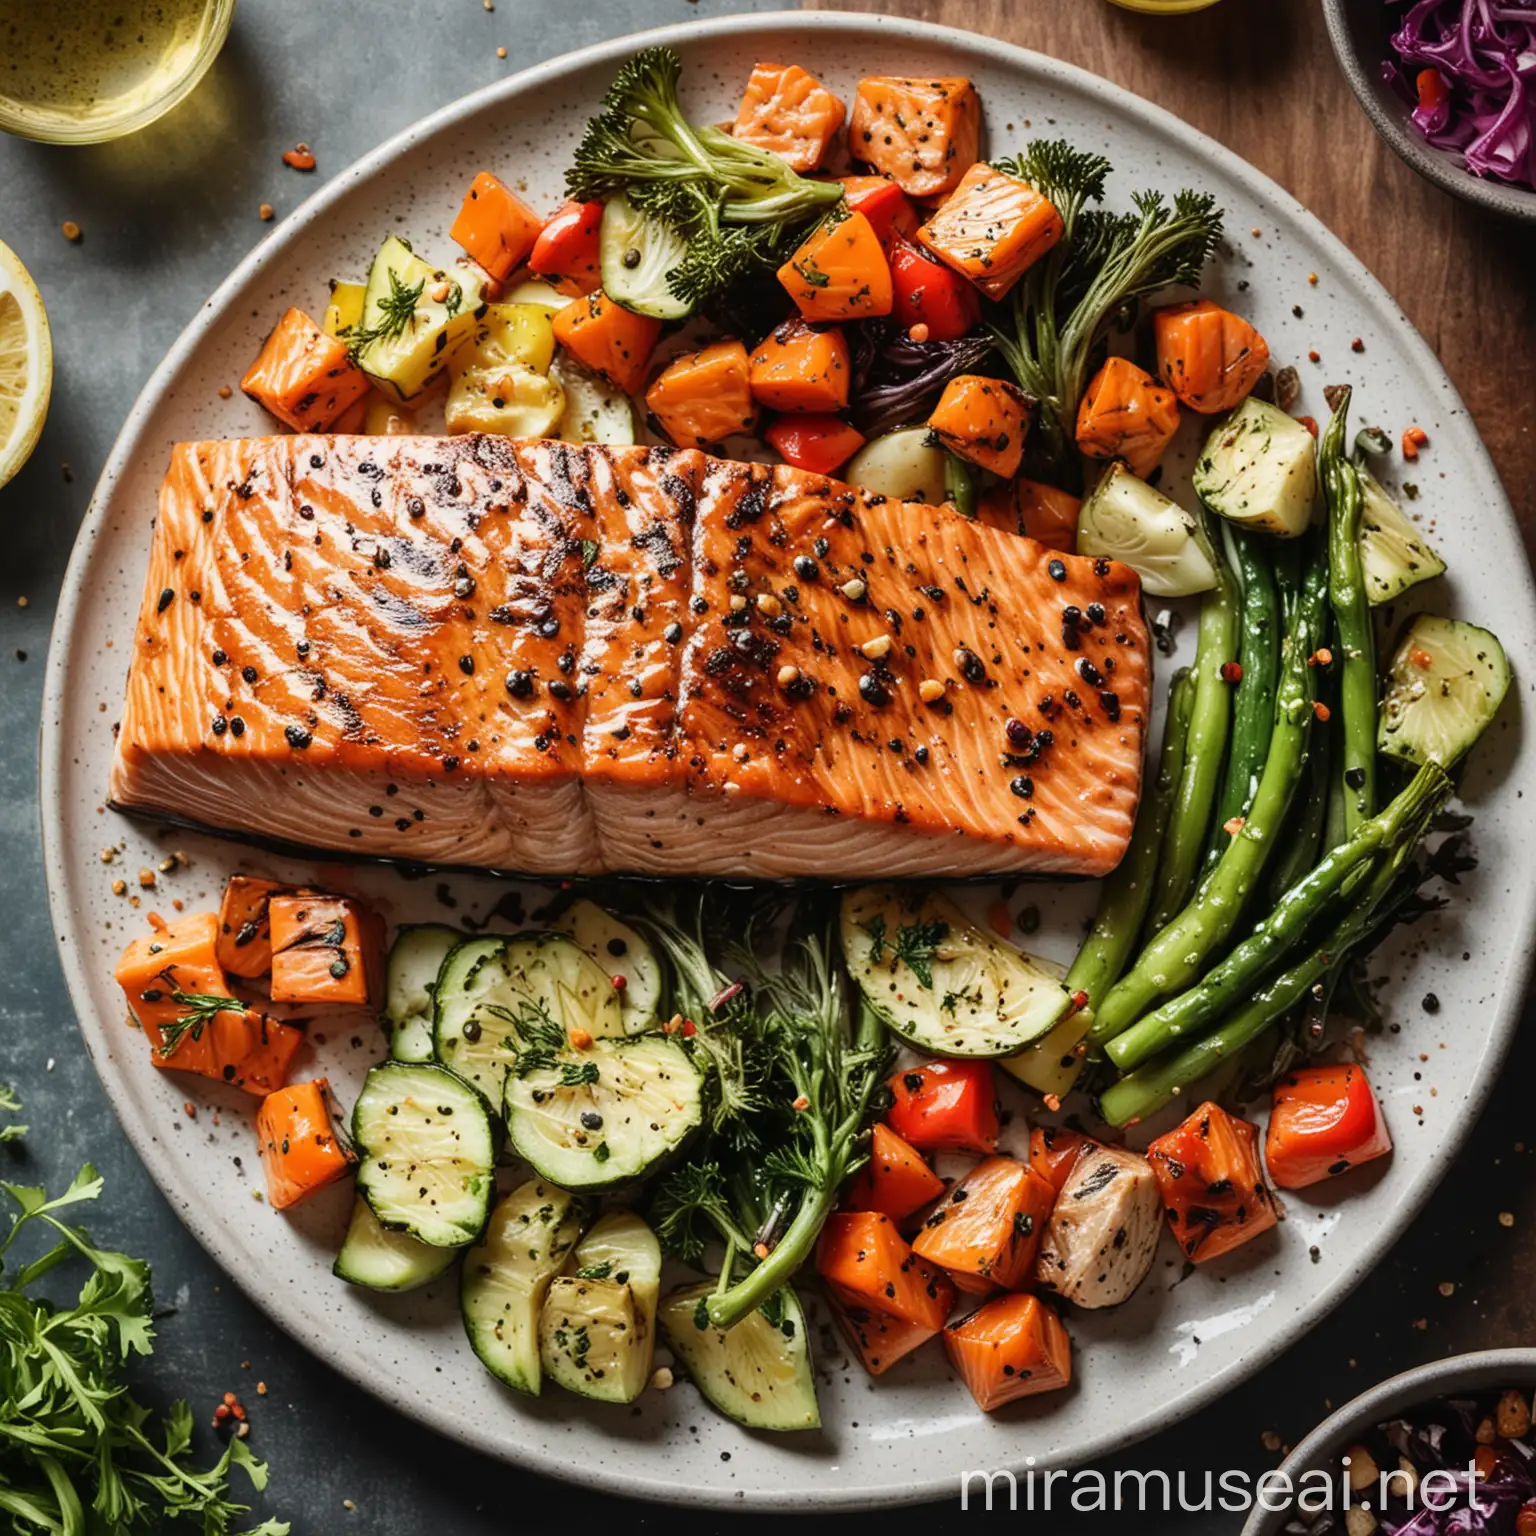 A vibrant picture of a grilled salmon fillet on a plate with a side of vegetables.